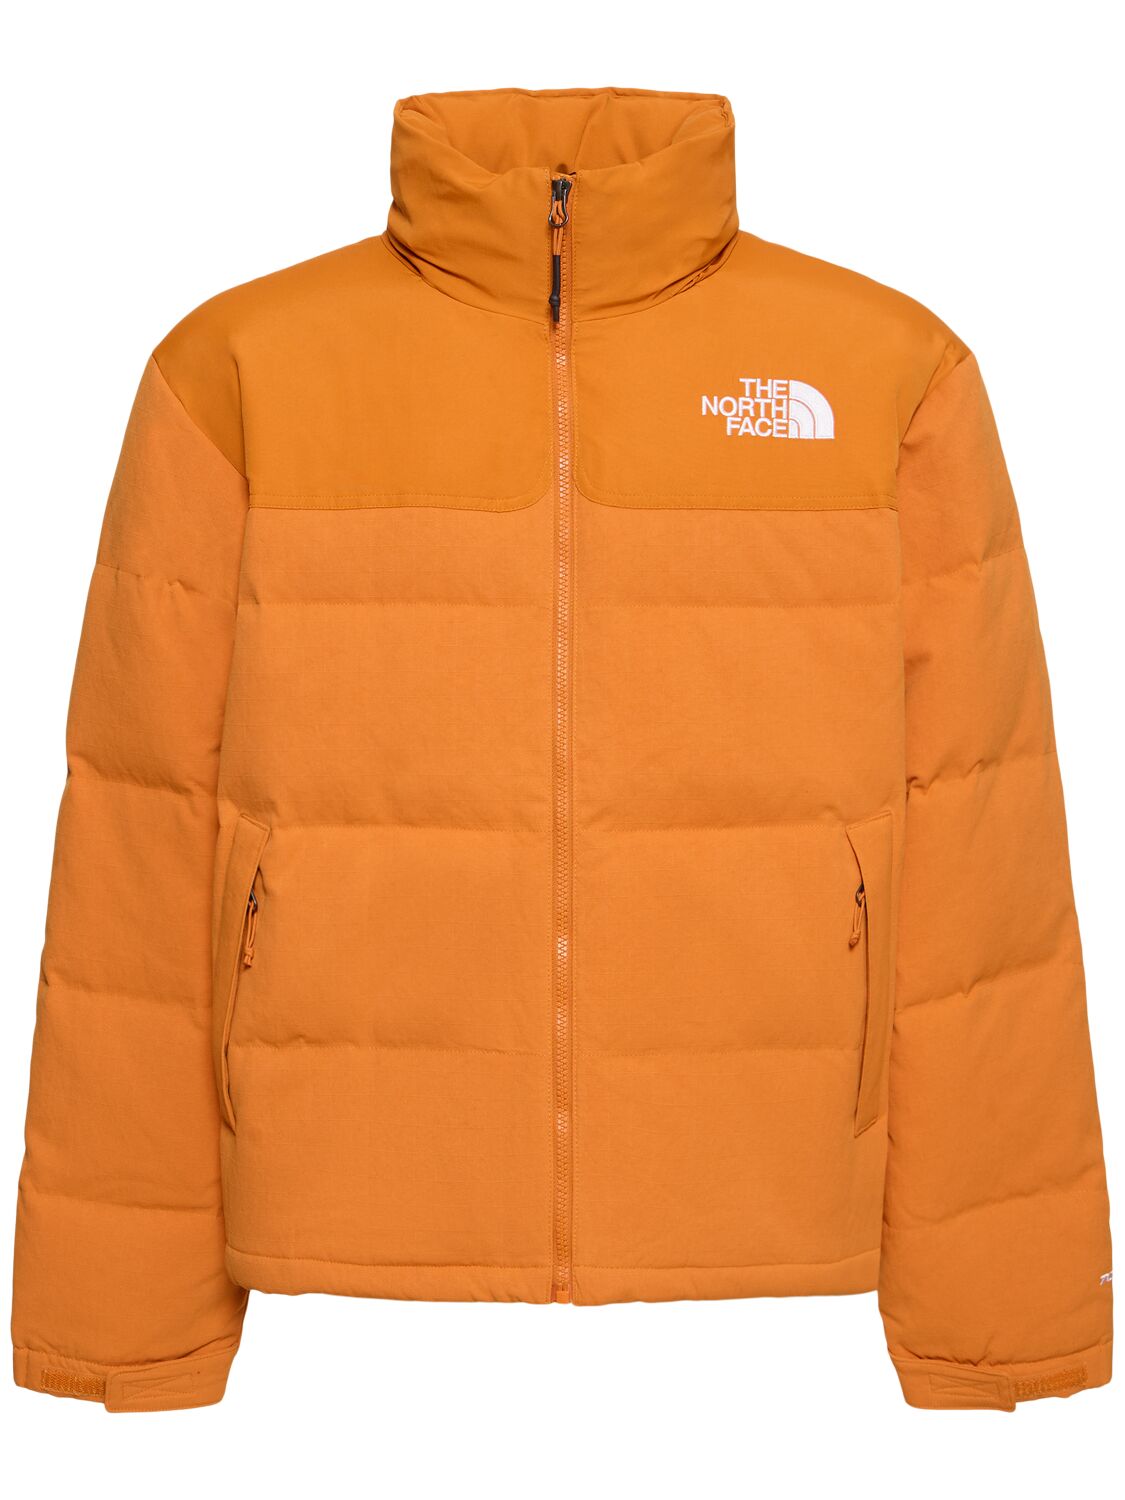 THE NORTH FACE 92 CRINKLE DOWN JACKET